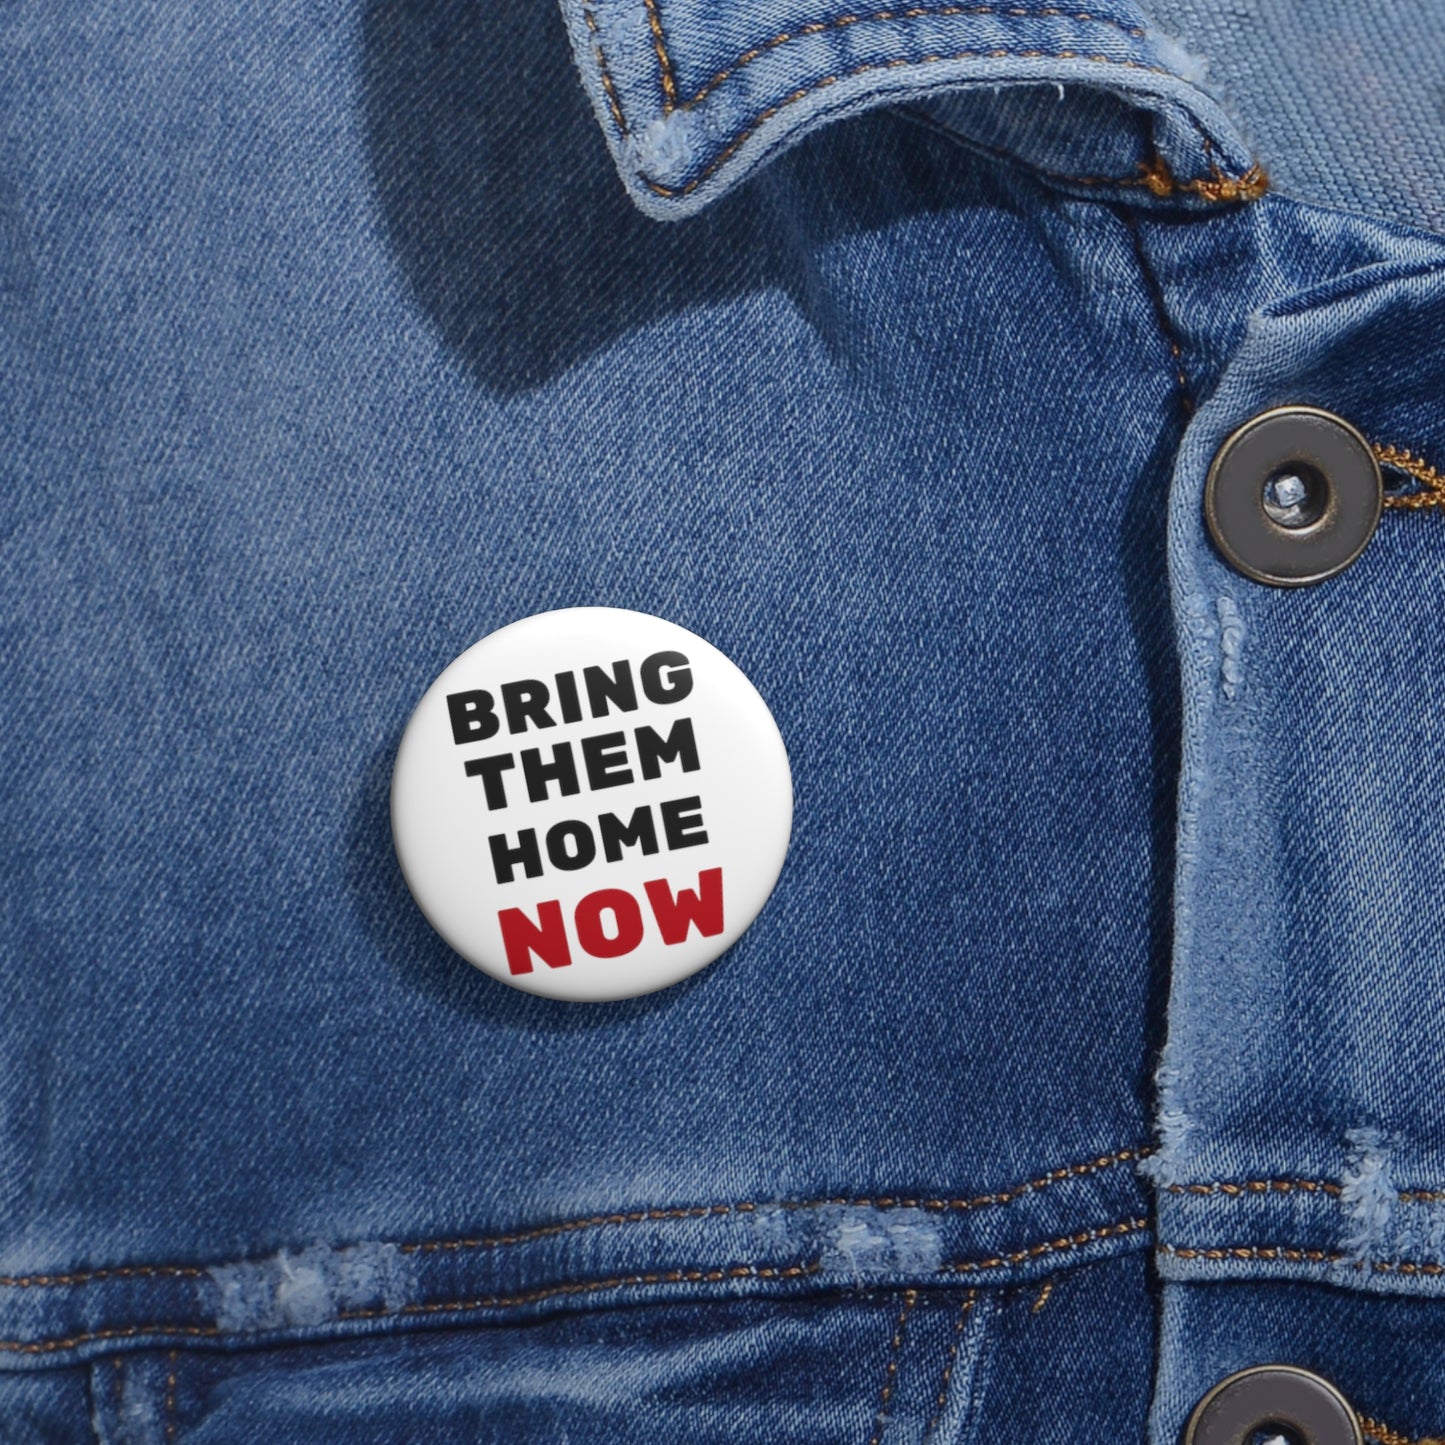 Bring them home now - Pin Buttons